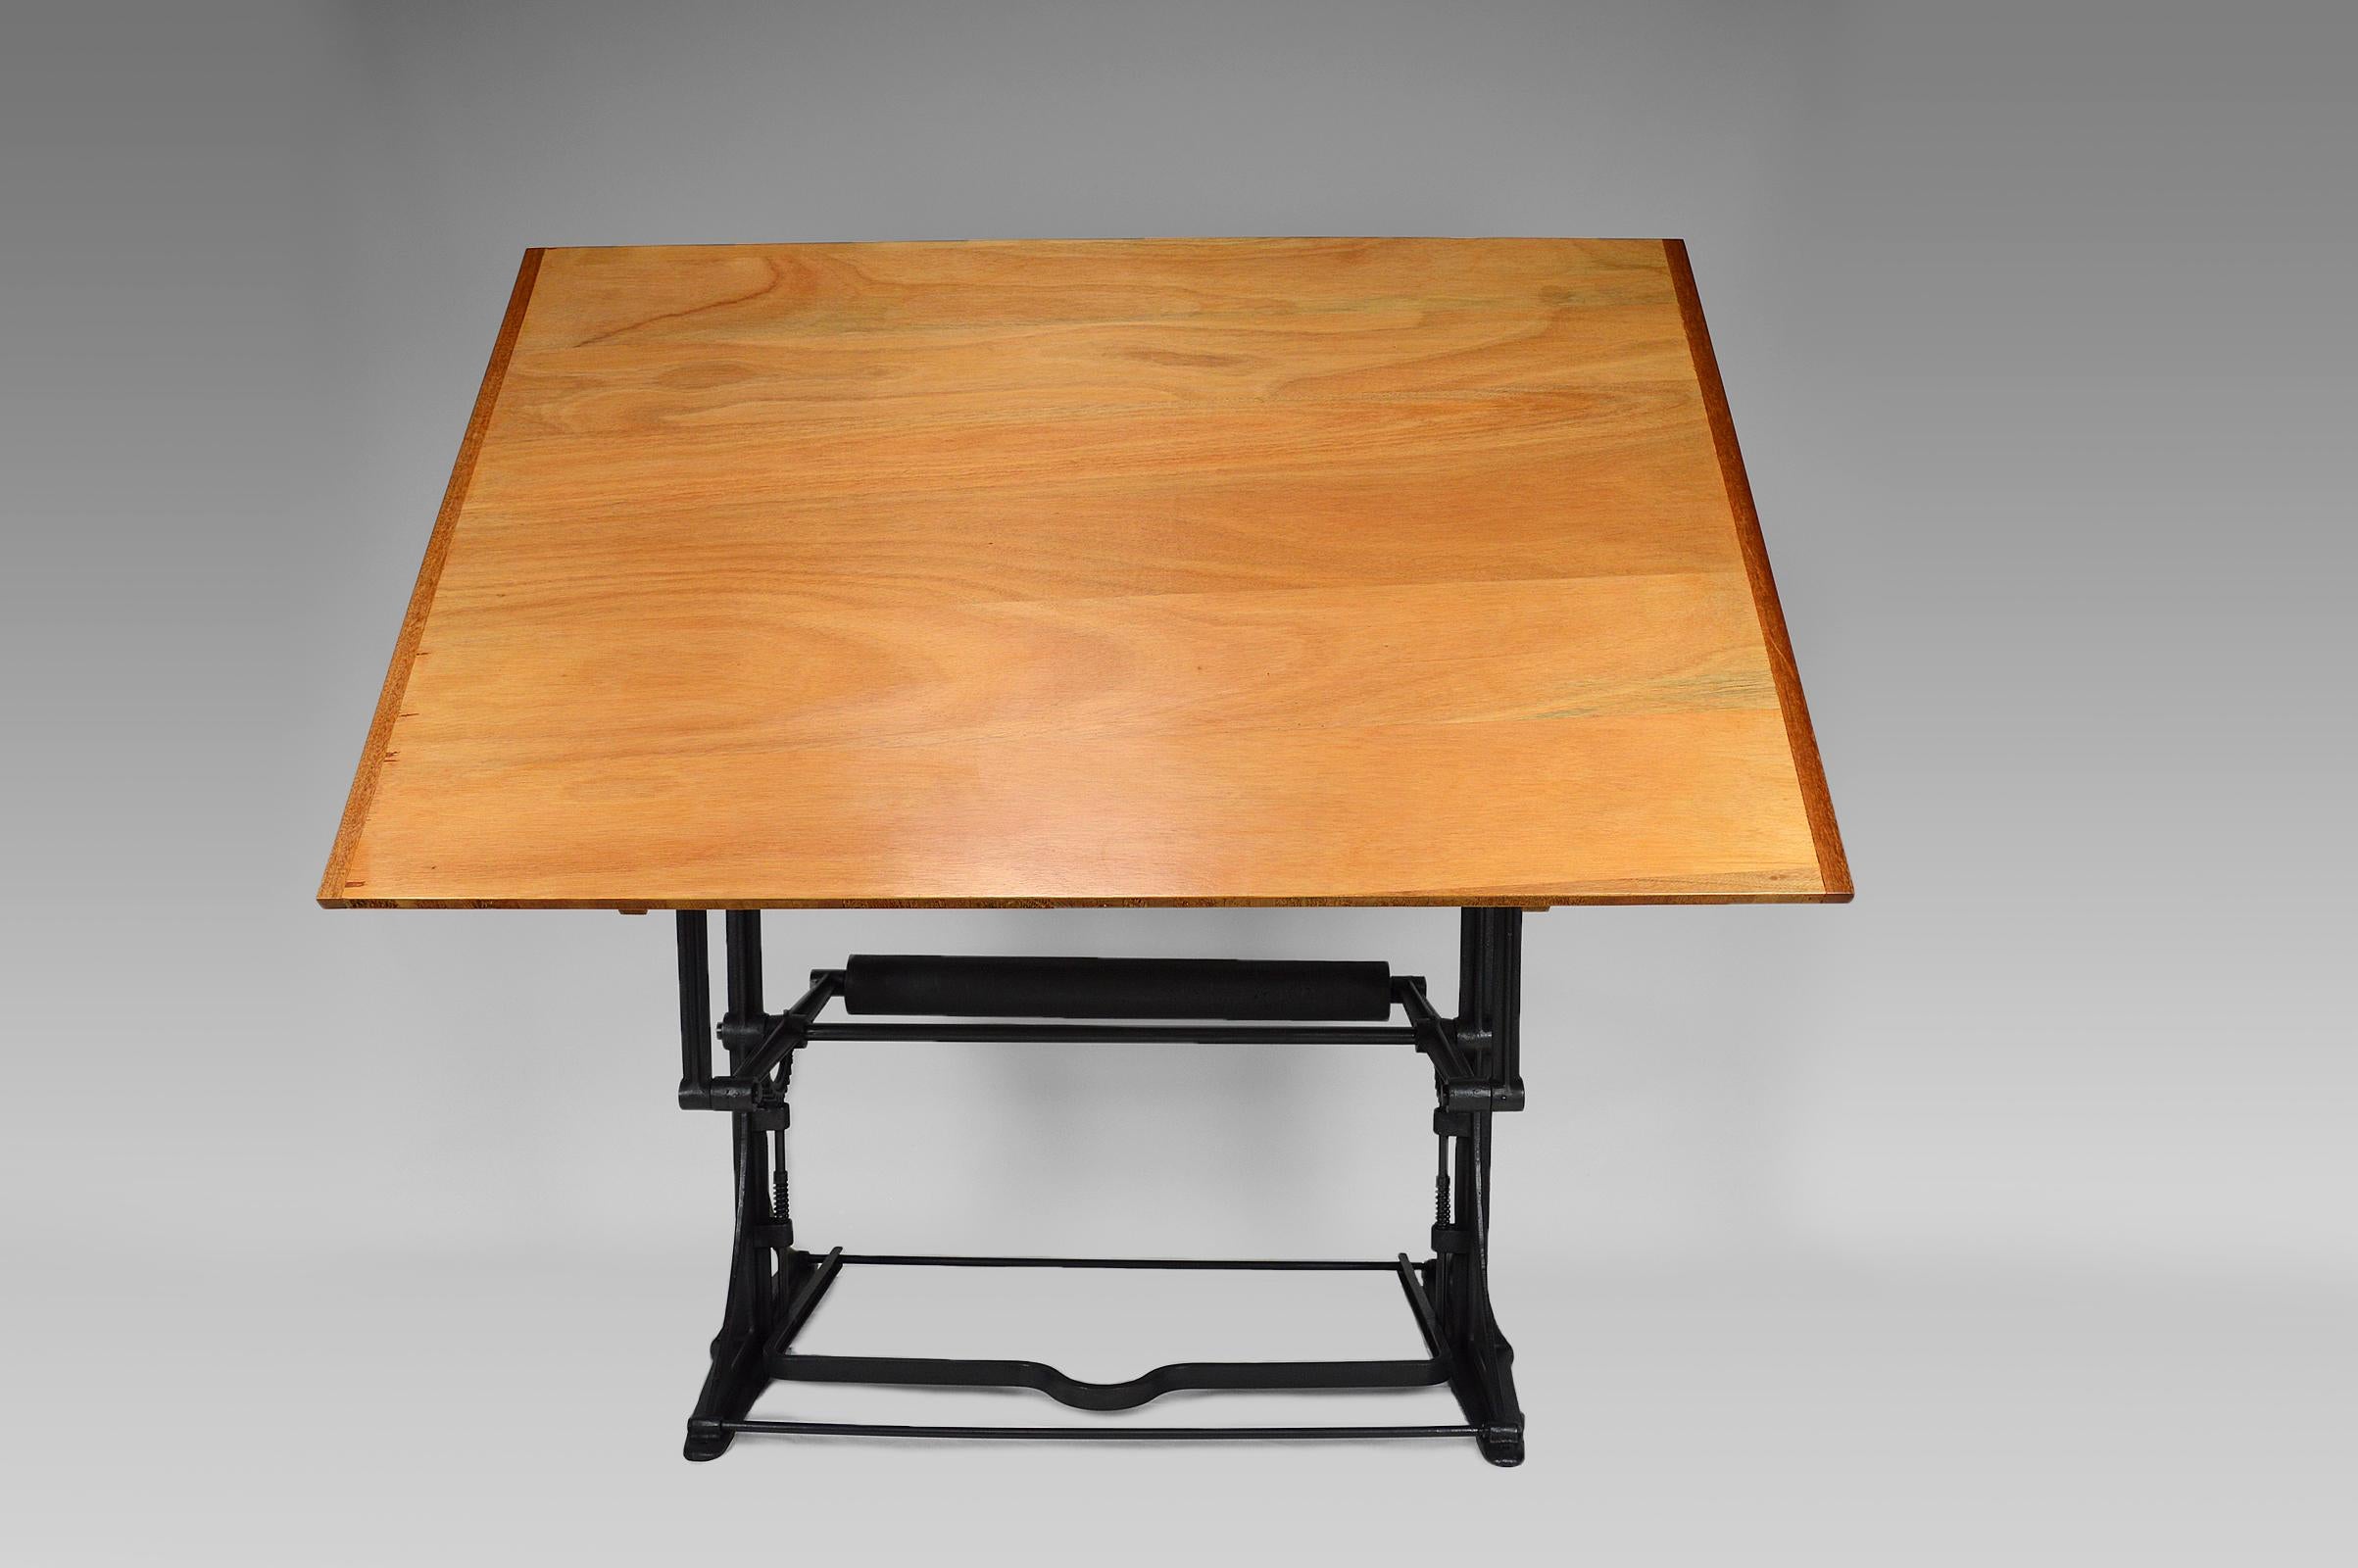 Superb drafting table / architect desk / work table.
The cast iron structure has an adjustable height system.
The wooden top has an adjustable inclination system.

Art Nouveau / Art Deco period, Industrial style, France, circa 1900-1920.

In